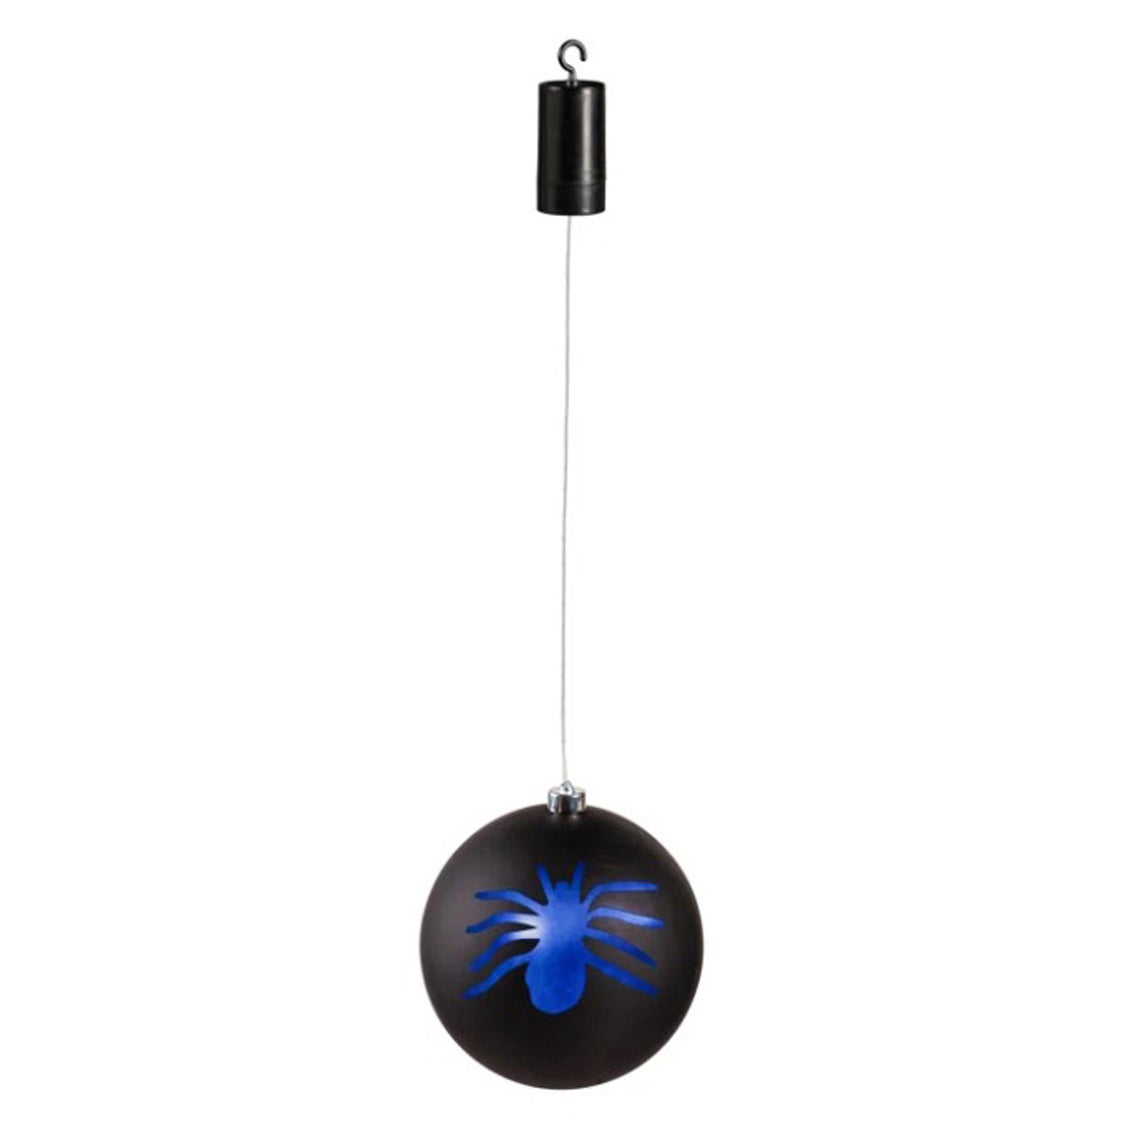 8" Shatterproof Battery Operated LED Ornament with Giant Spiders, Black